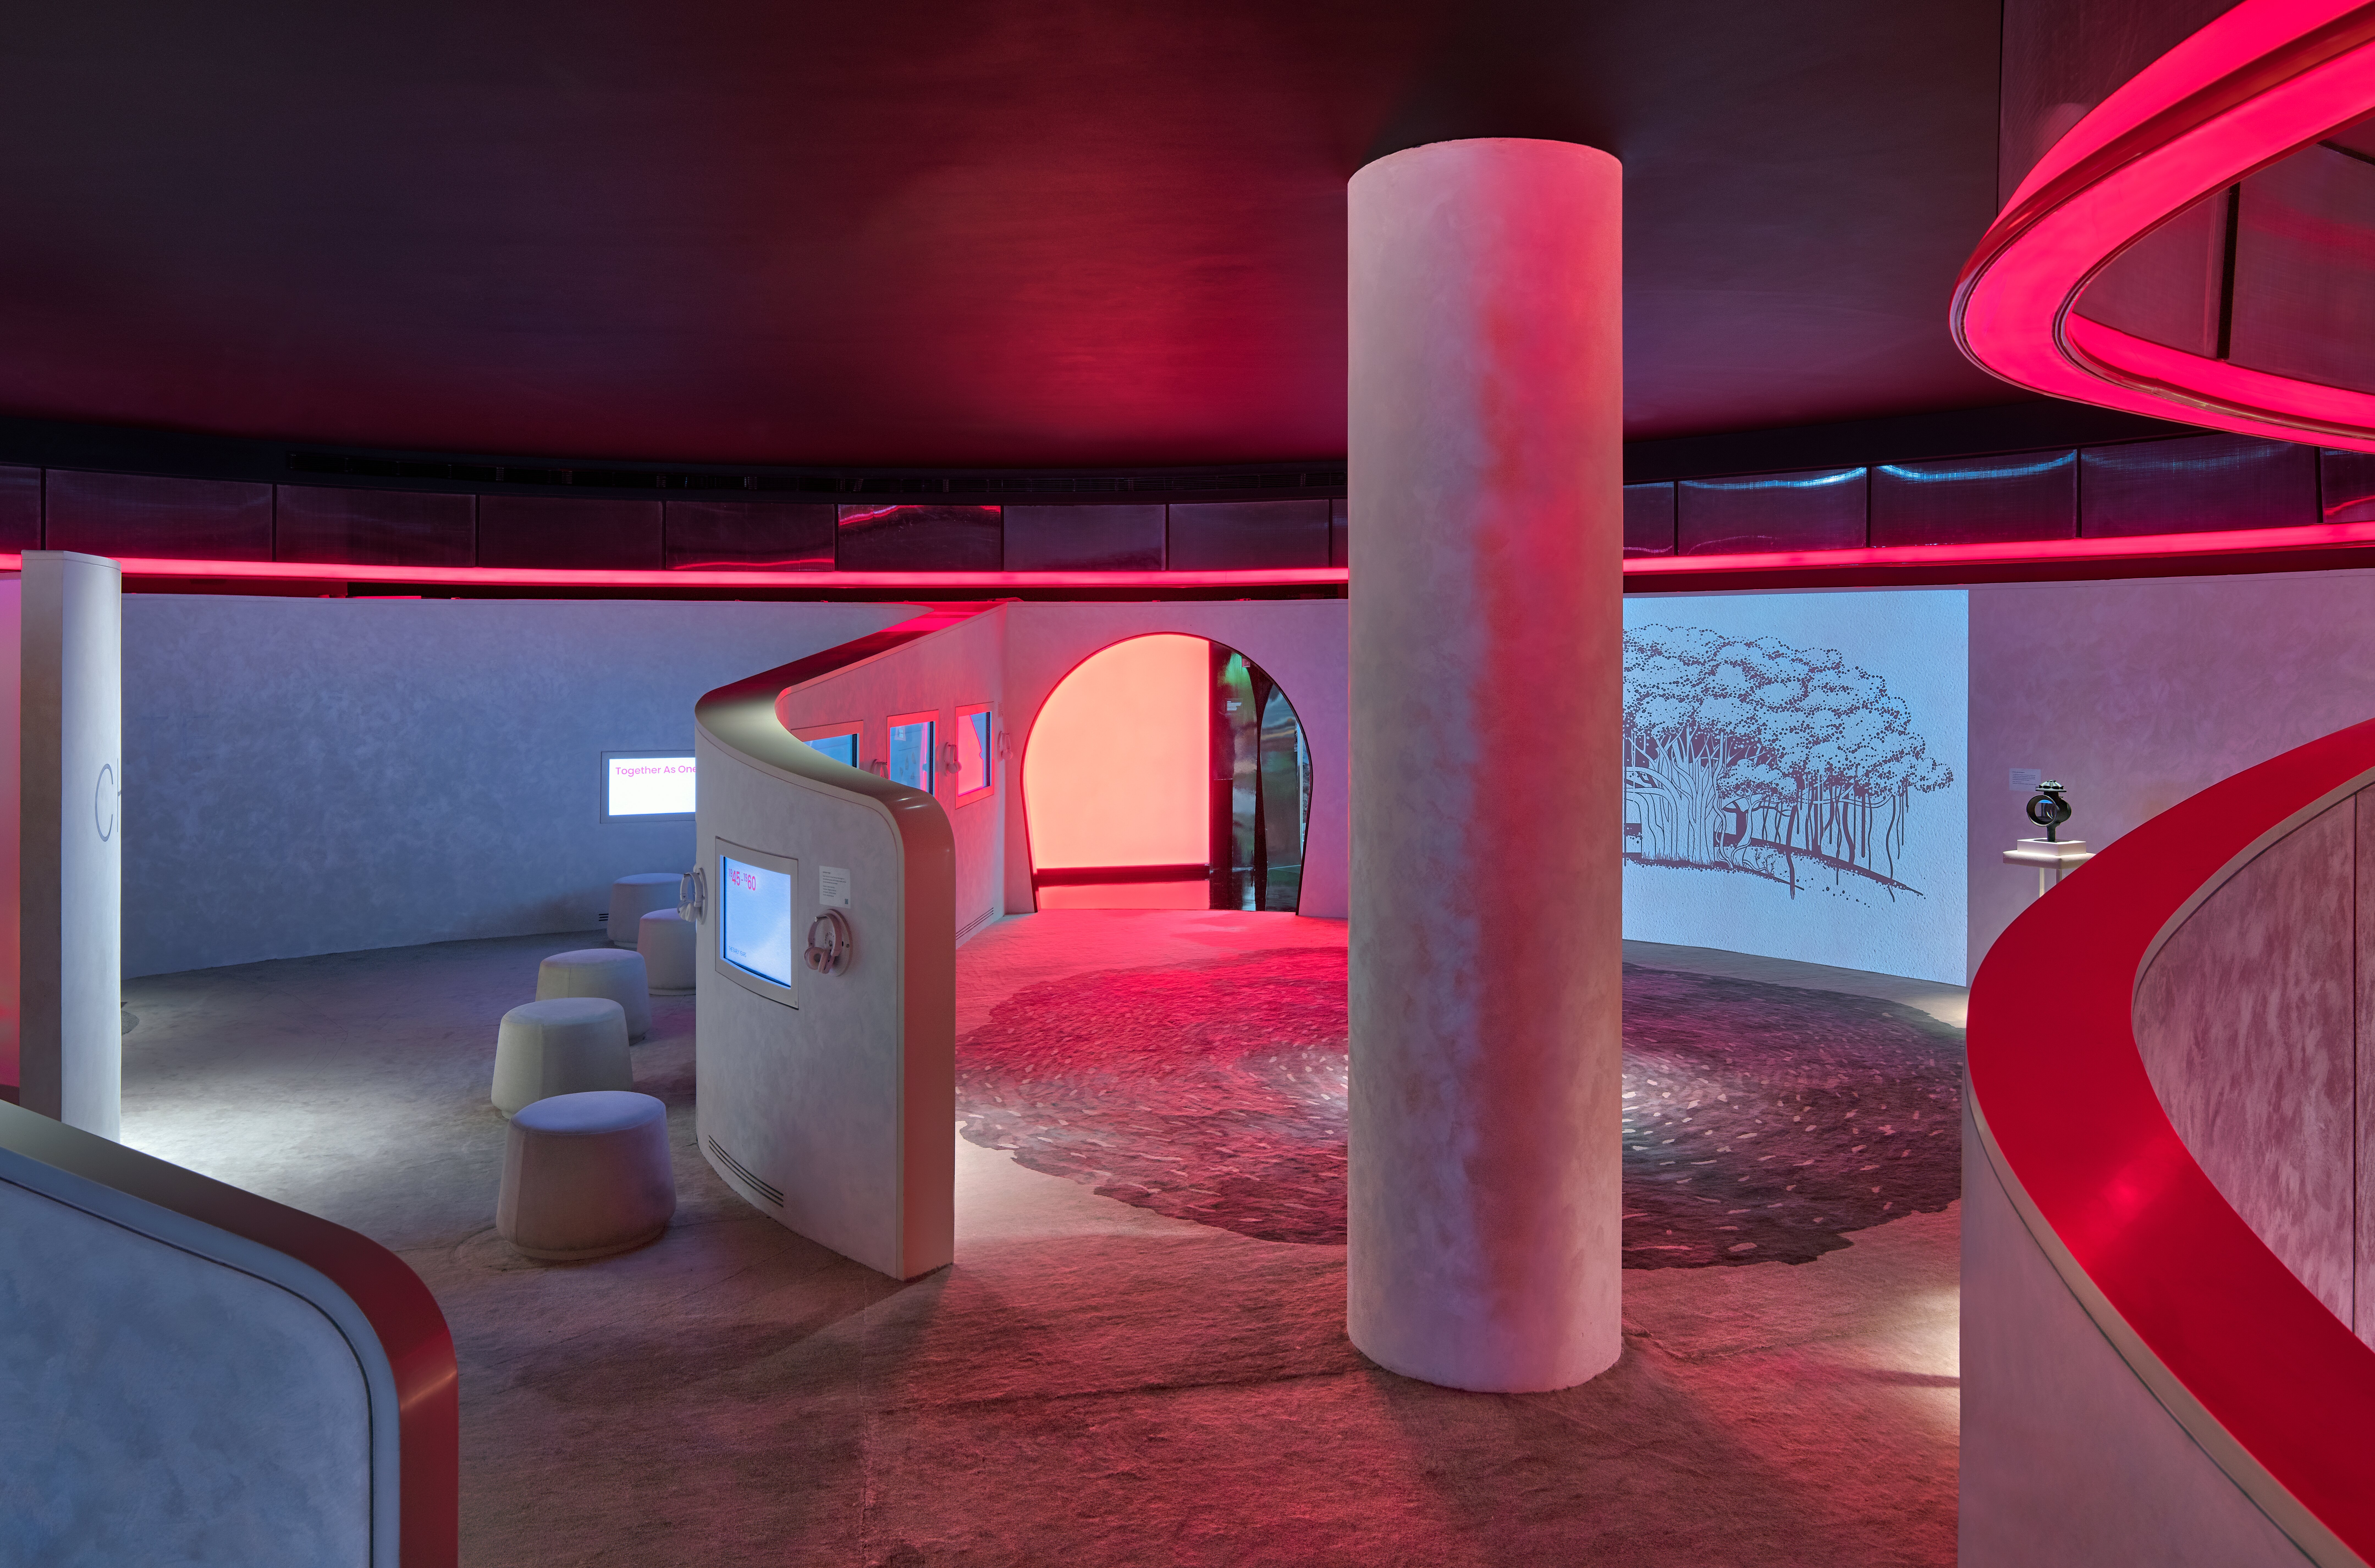 The Mahindra Museum of Living History designed by Figments where the use of contrast and illumination layering added depth and drama. Bright red fabric light was used to create a zone with shock value, allowing visitors to get acclimatized to the transition into an experiential space. 